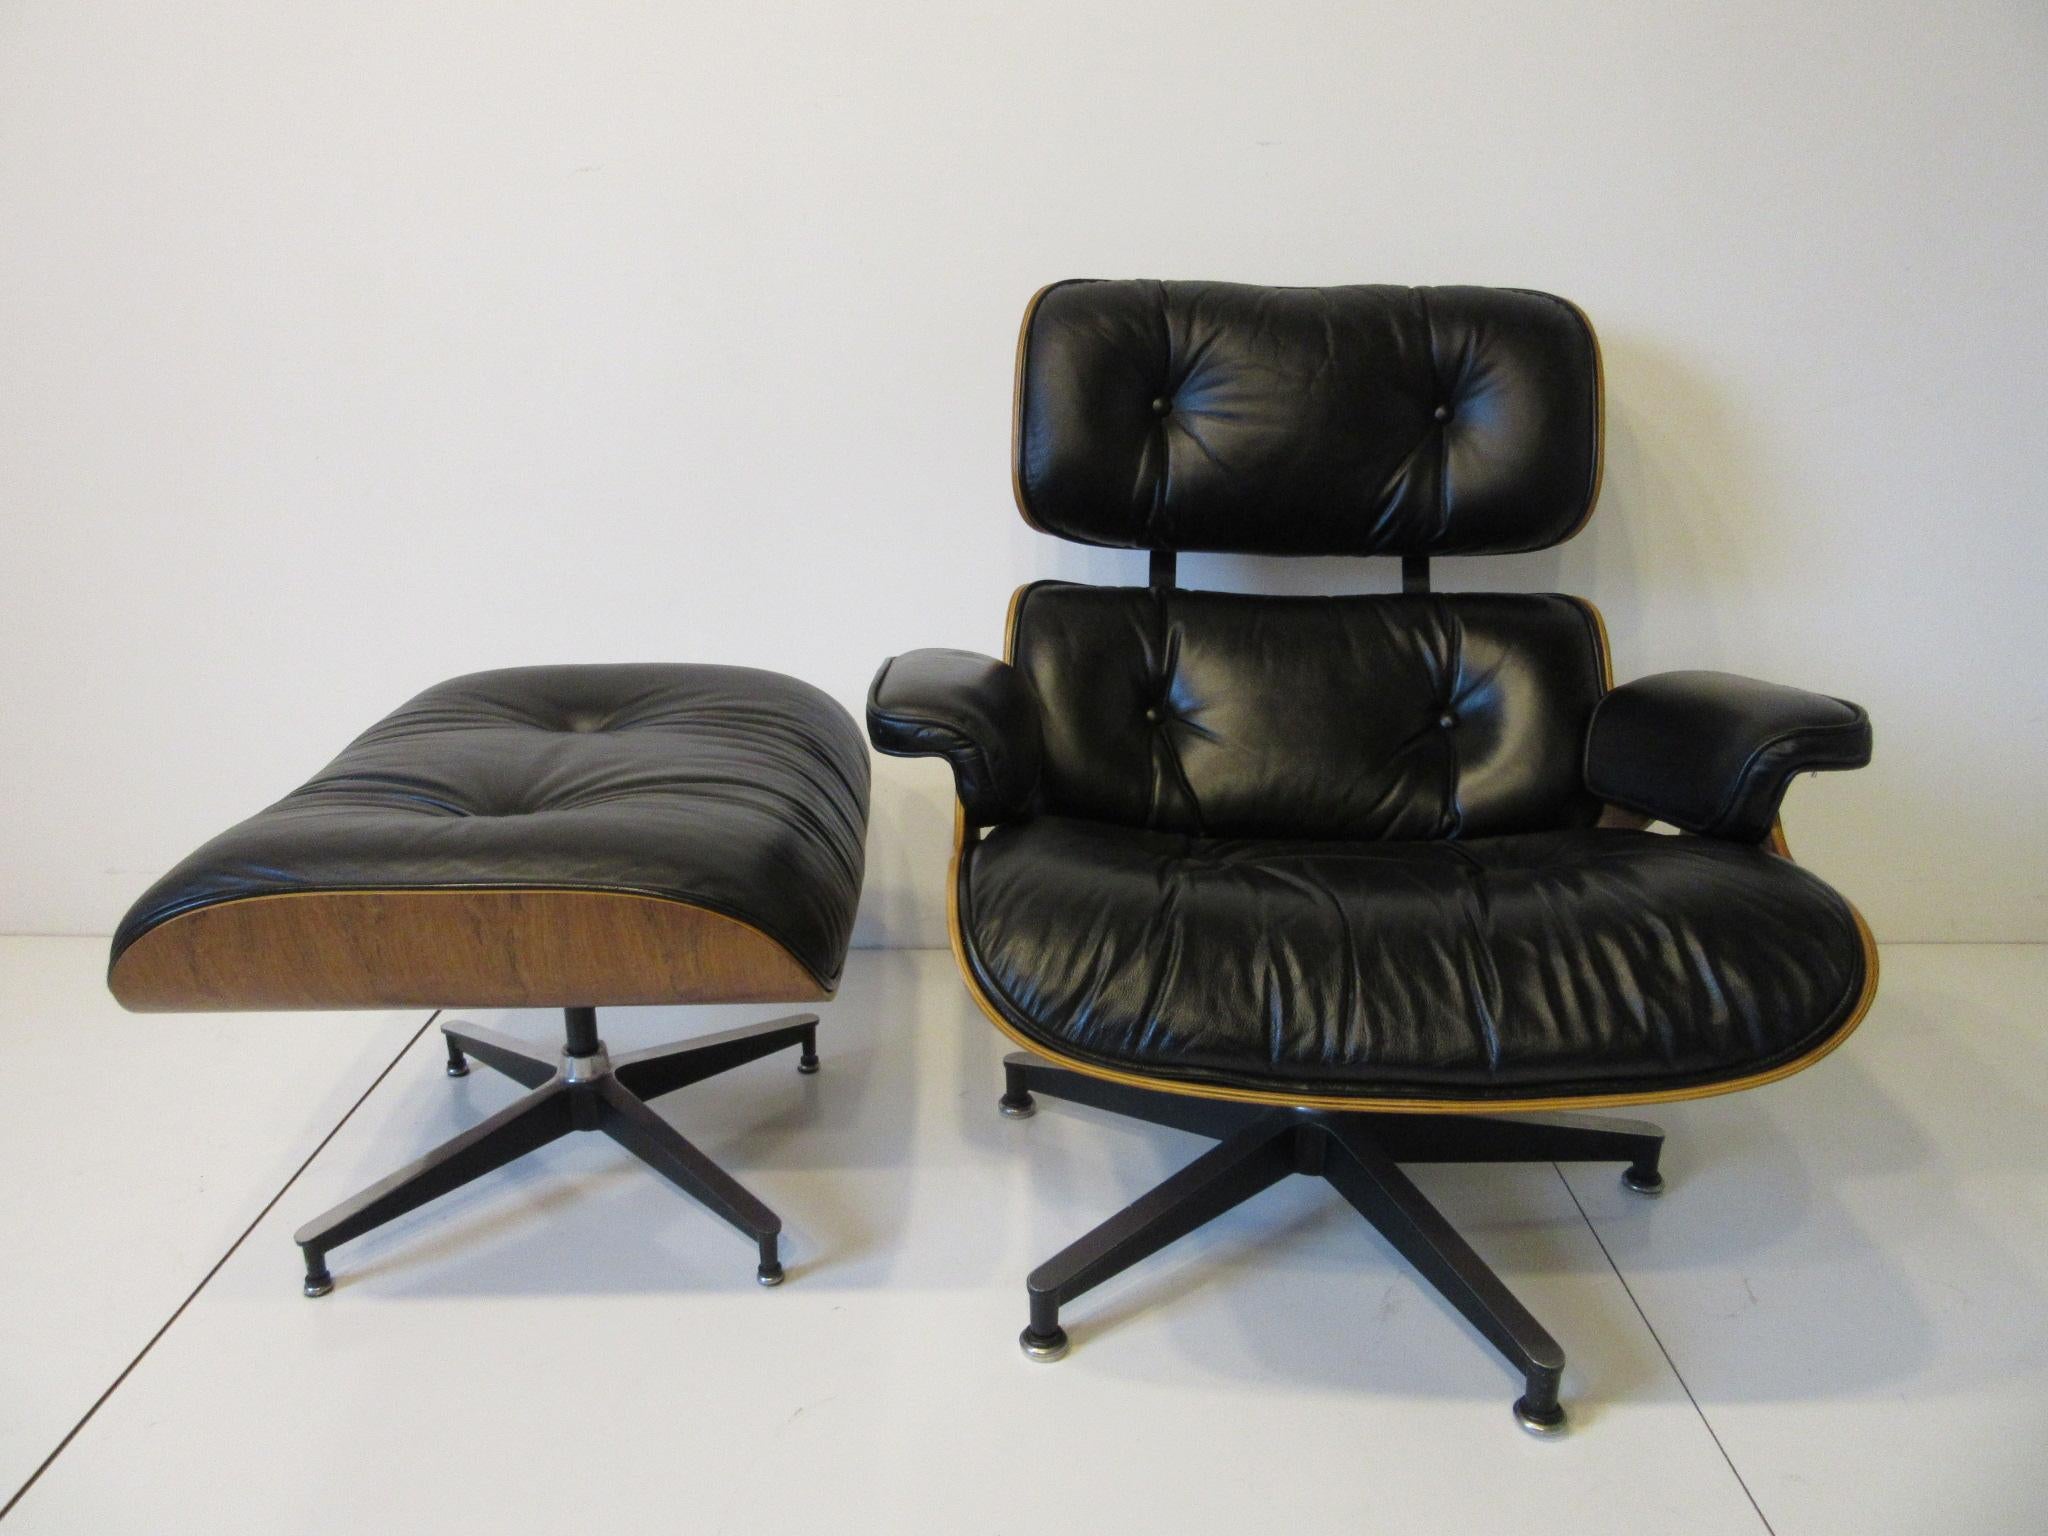 20th Century Eames Rosewood and Leather 670 Lounge Chair with Ottoman